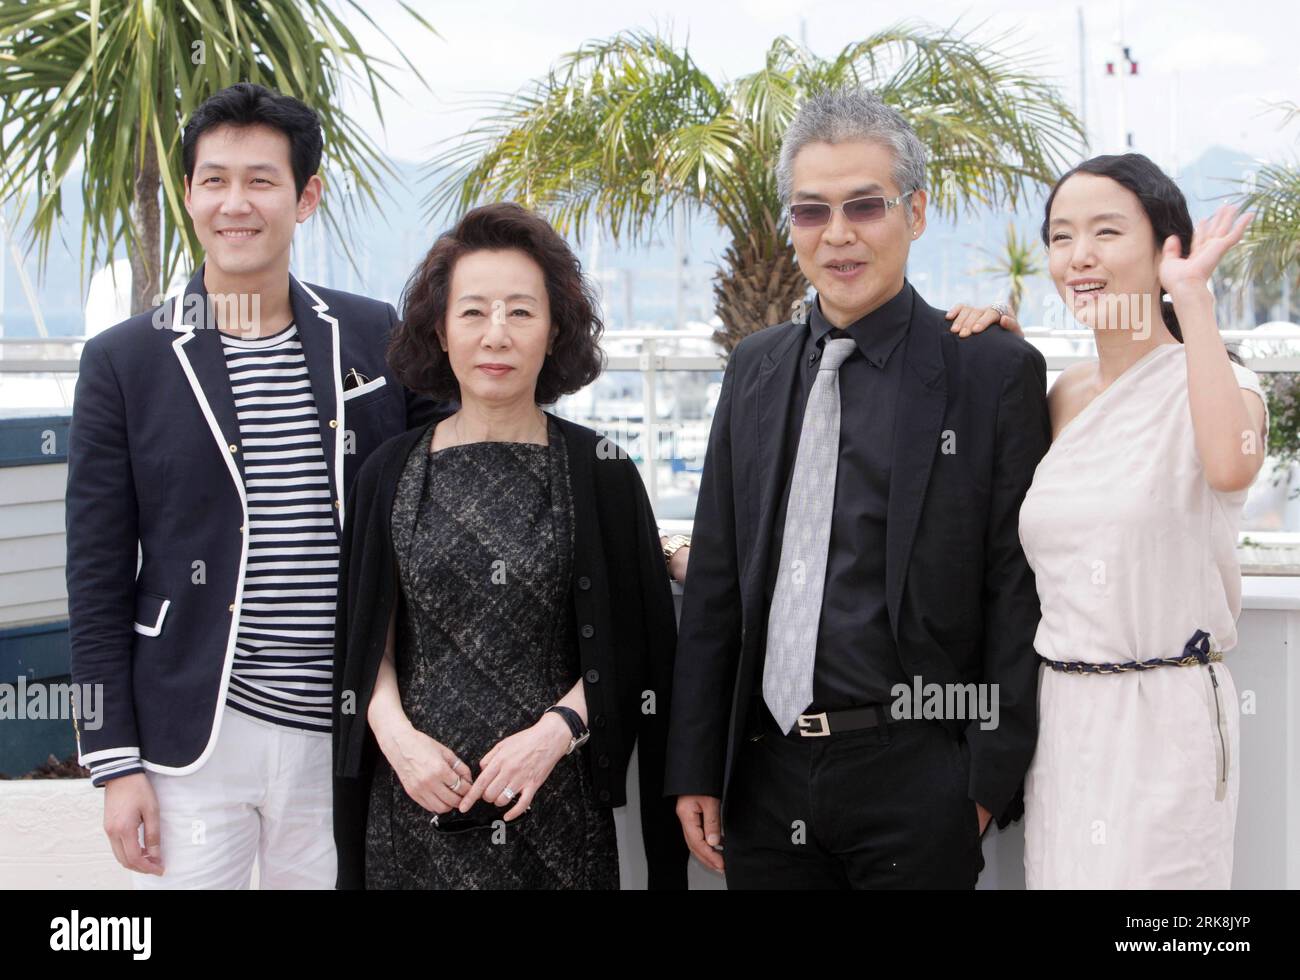 Bildnummer: 54047457  Datum: 14.05.2010  Copyright: imago/Xinhua (100514) -- CANNES, May 14, 2010 (Xinhua) -- Cast members Lee Jung-Jae (1st L), Youn Yuh-Jung (2nd L), director Im Sang-Soo (3rd L) and Jeon Do-Youn pose during a photocall for the film Housemaid at the 63rd Cannes Film Festival in Cannes, France, May 14, 2010. (Xinhua/Chen He) (zl) (4)FRANCE-CANNES-FILM FESTIVAL-HOUSEMAID PUBLICATIONxNOTxINxCHN People Kultur Entertainment Film 63. Internationale Filmfestspiele Cannes Filmfestival Photocall kbdig xmk 2010 quer    Bildnummer 54047457 Date 14 05 2010 Copyright Imago XINHUA  Cannes Stock Photo